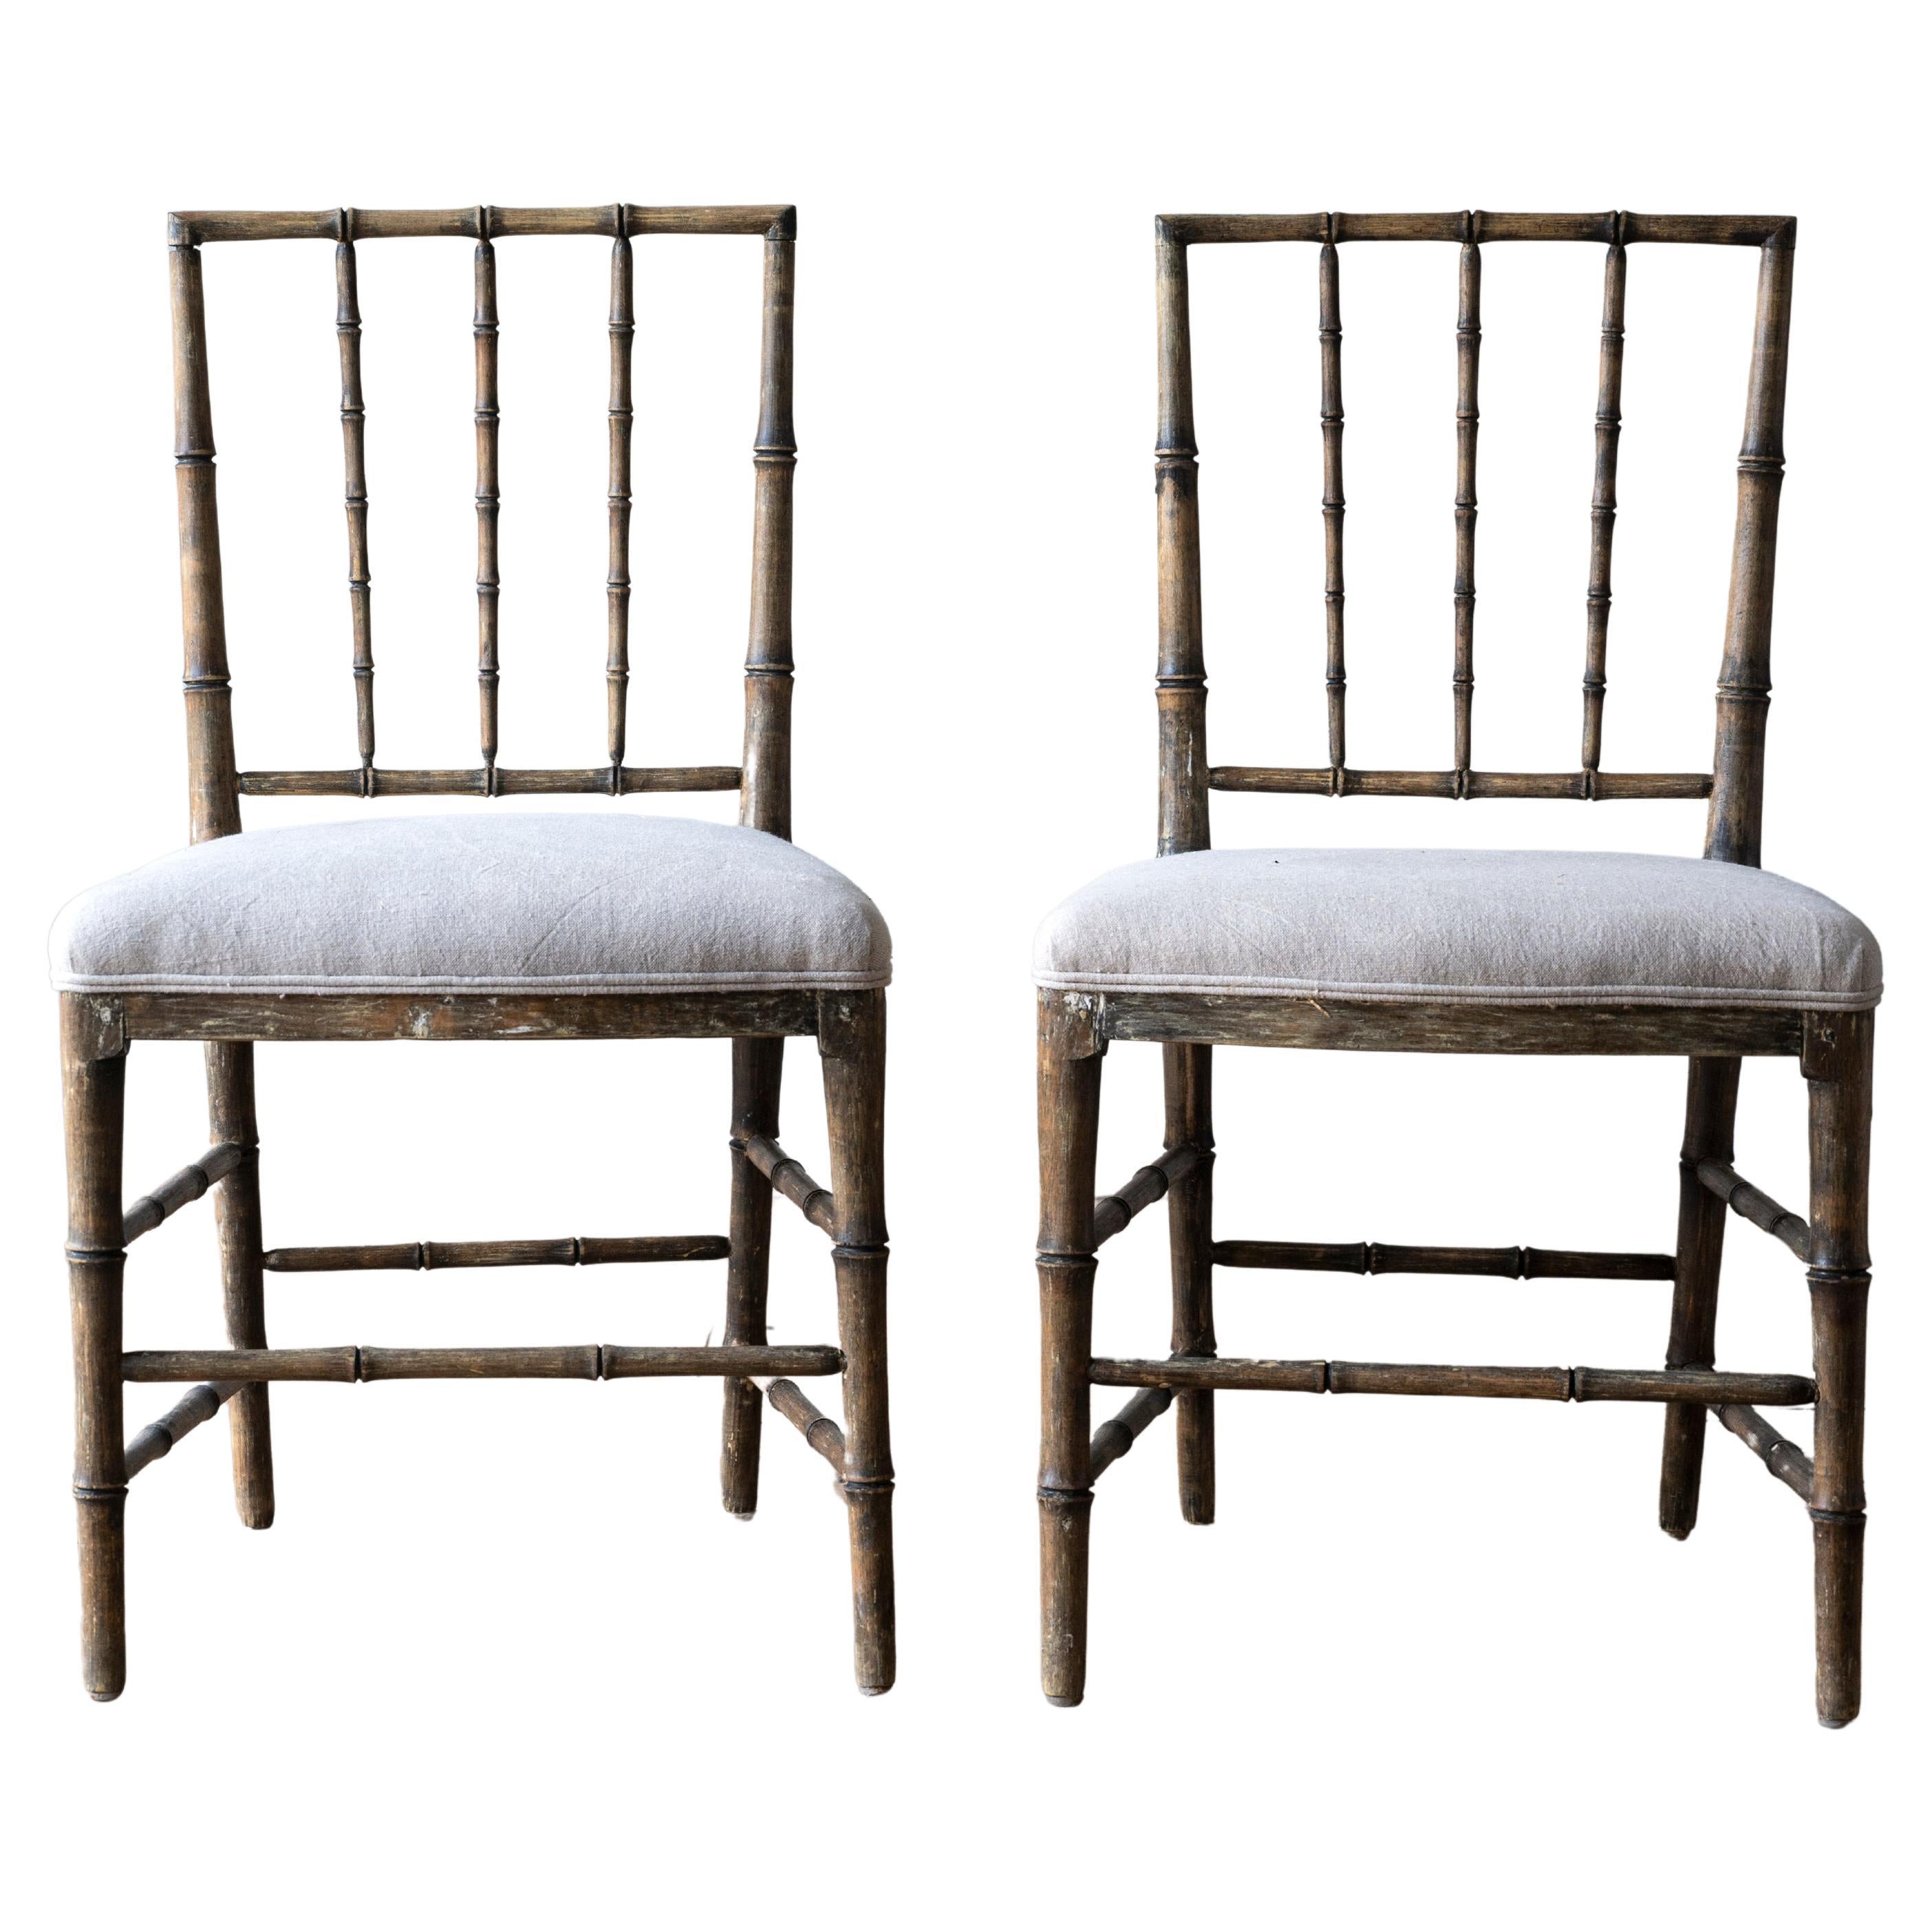 Rare pair of 19th Century Gustavian Faux Bamboo Chairs